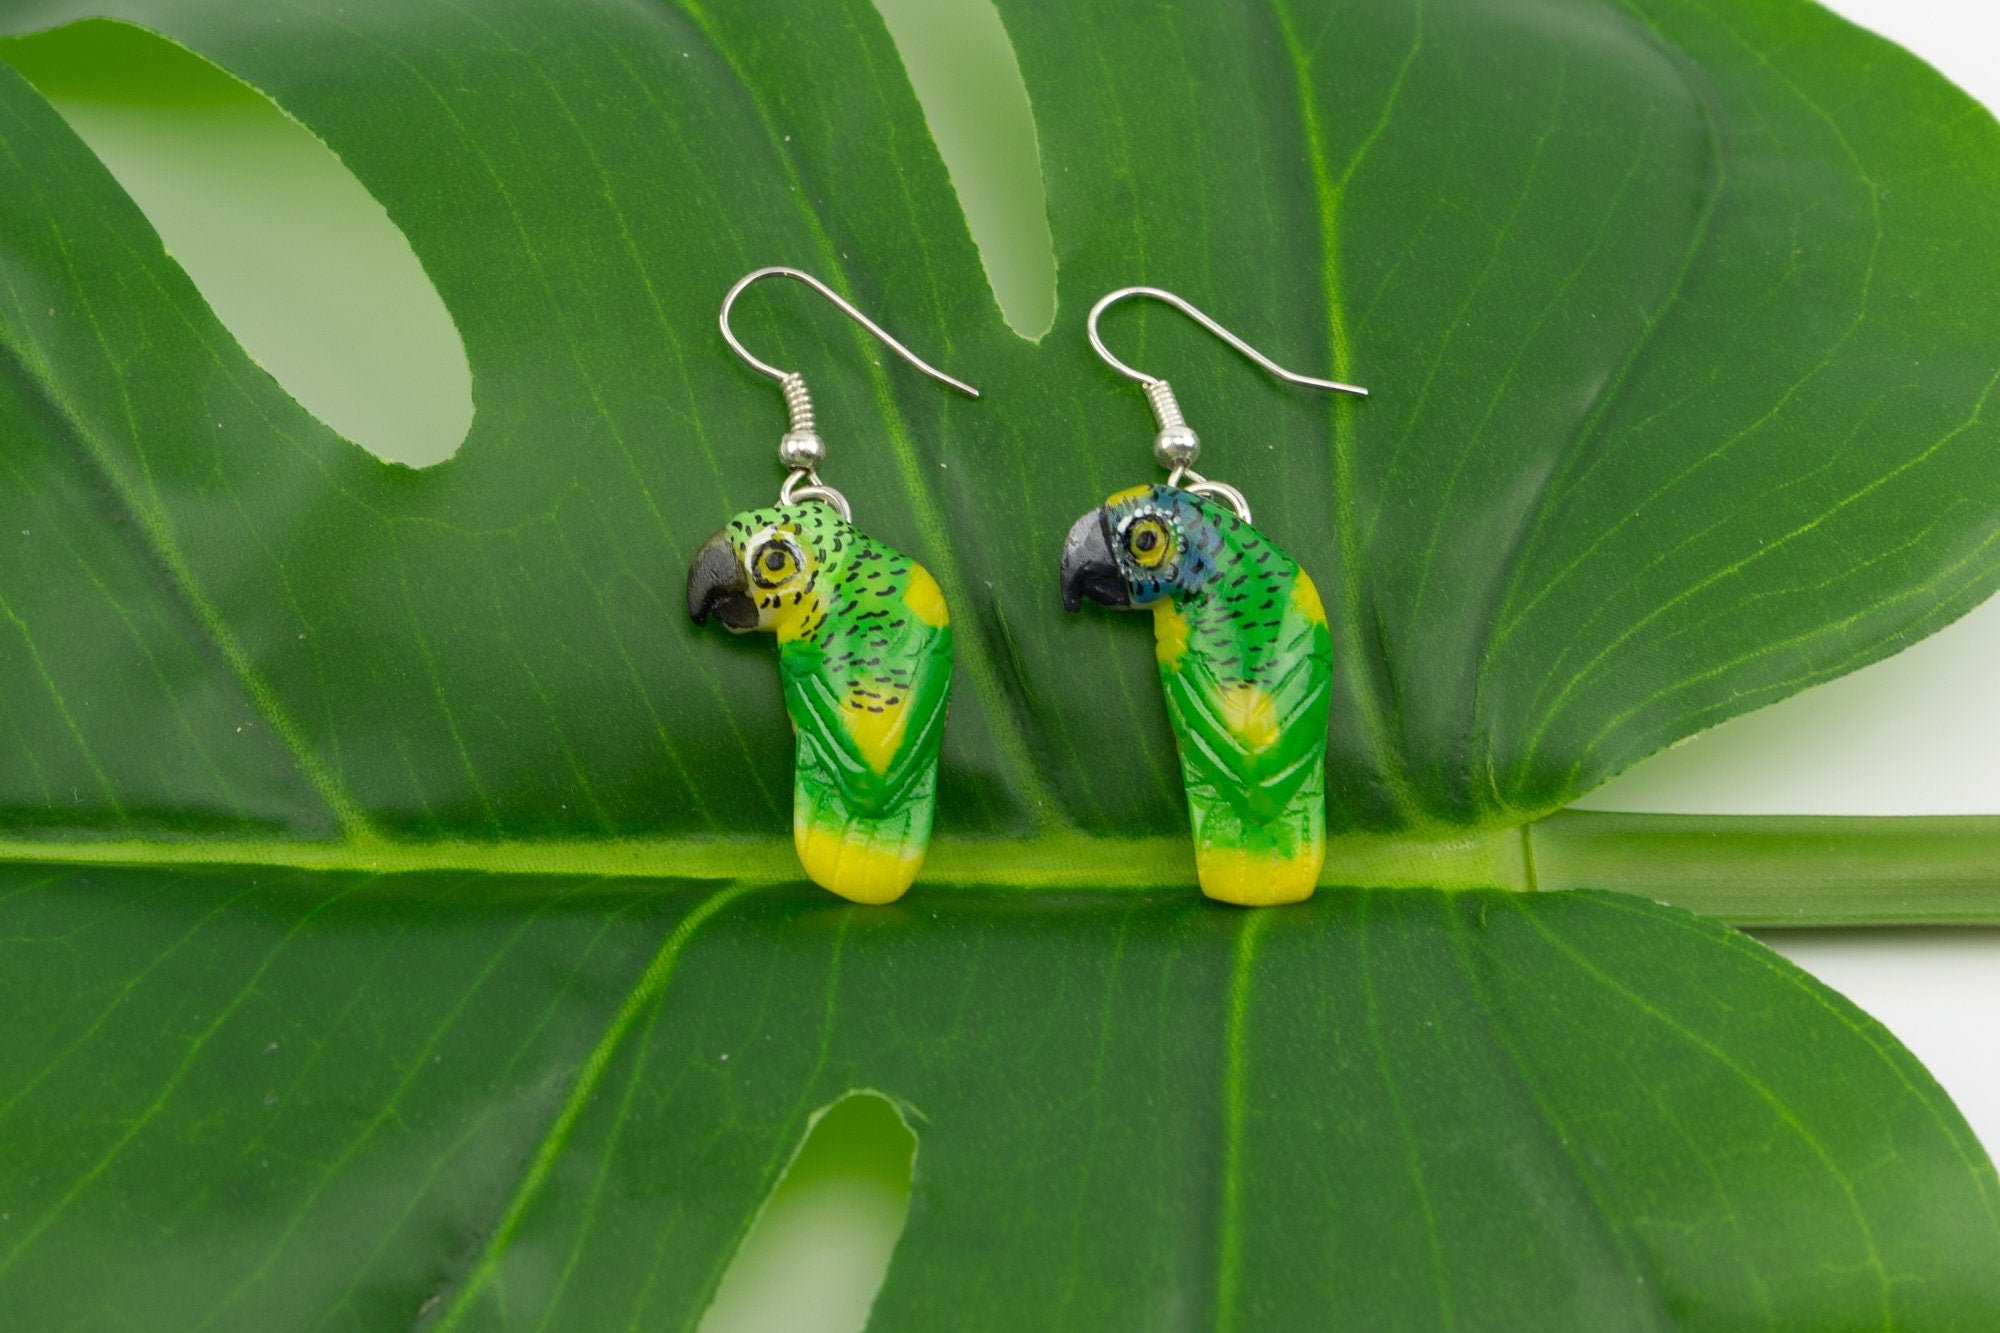 Classic Hand Carved Tagua Nut Parrot Earrings Panama